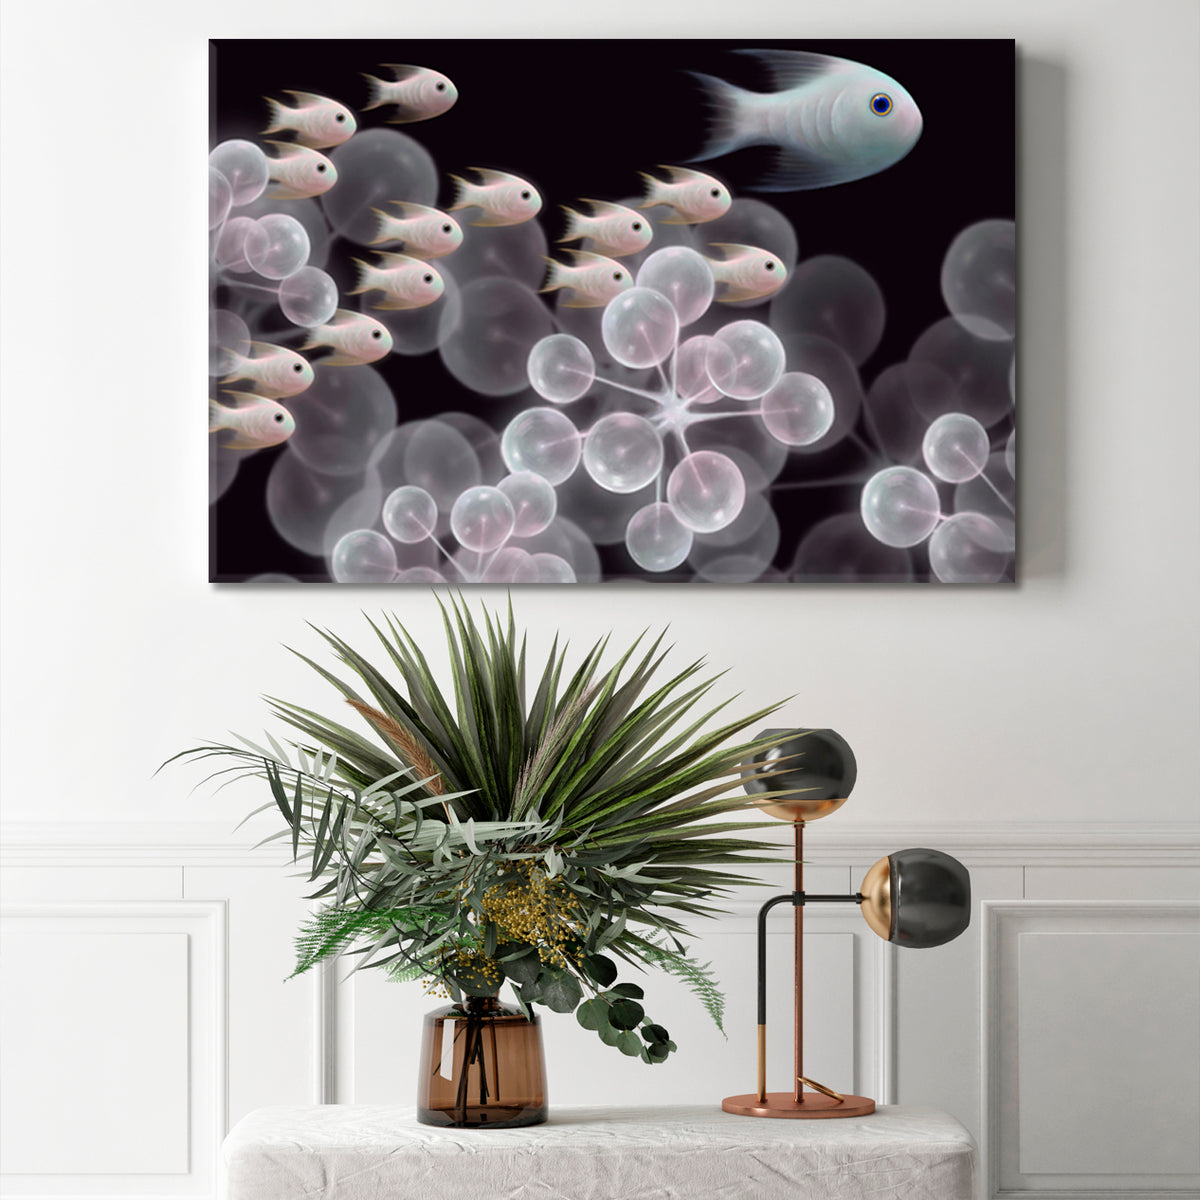 INNER UNIVERSE Live Organism Molecules And Schooling Fish Abstract Fantasy Nautical, Sea Life Pattern Art Artesty 1 panel 24" x 16" 